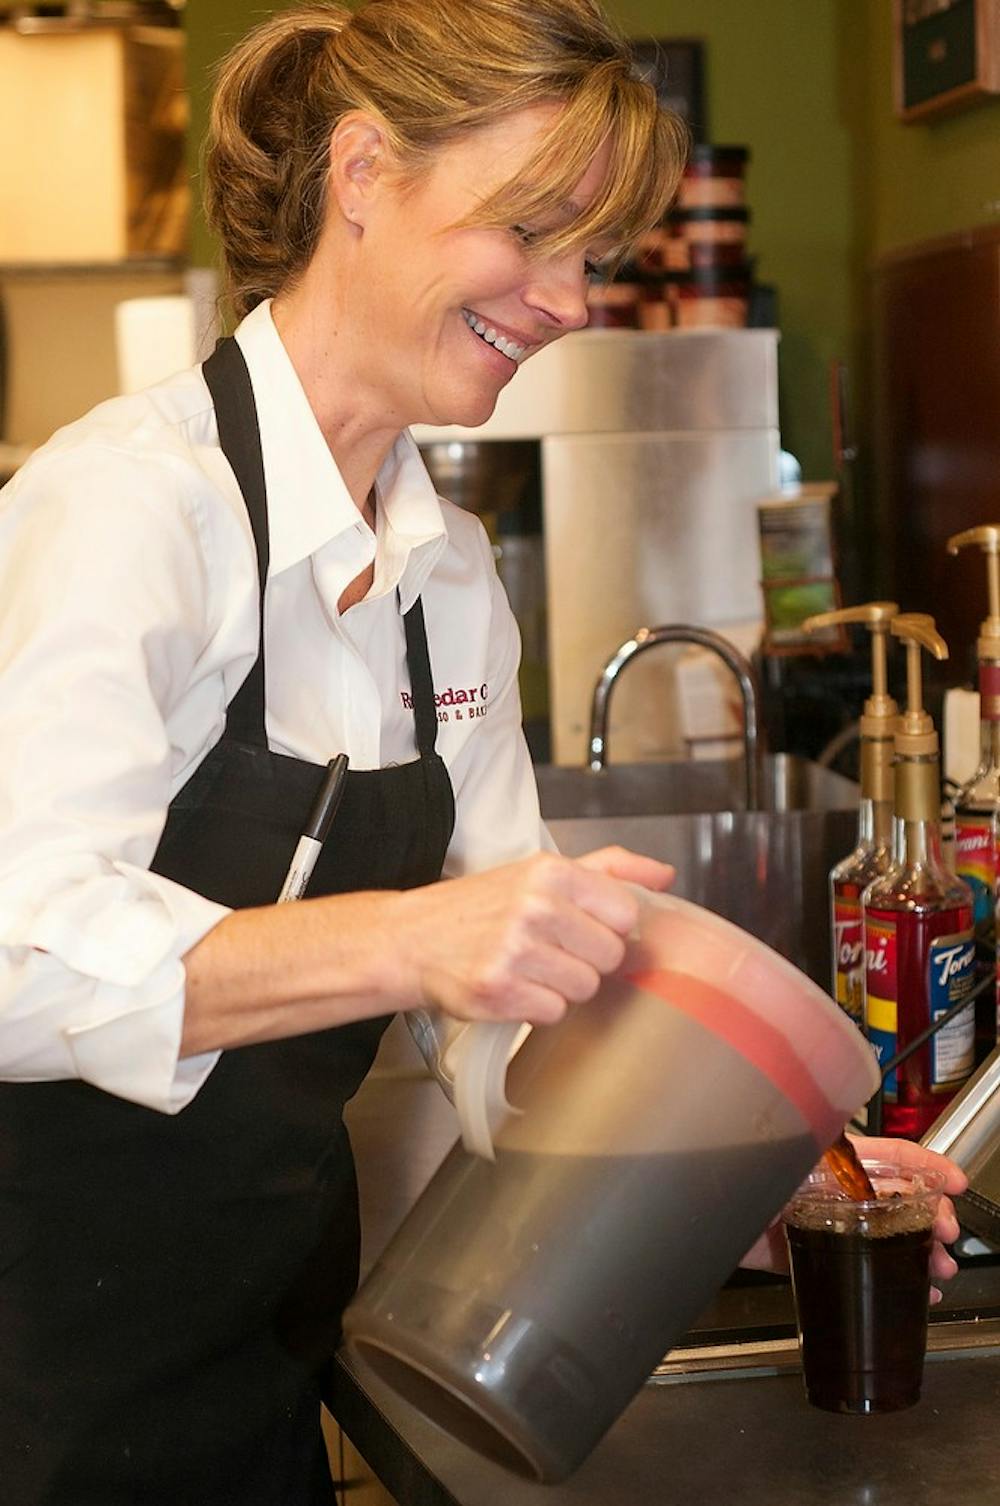 	<p>Owner Angie Anderson pours a cup of iced coffee Nov. 21, 2013, at the Red Cedar Cafe, 1331 E. Grand River Ave. Anderson is very active at the restaurant with making drinks, working at the counter and interacting with her usual customers.</p>